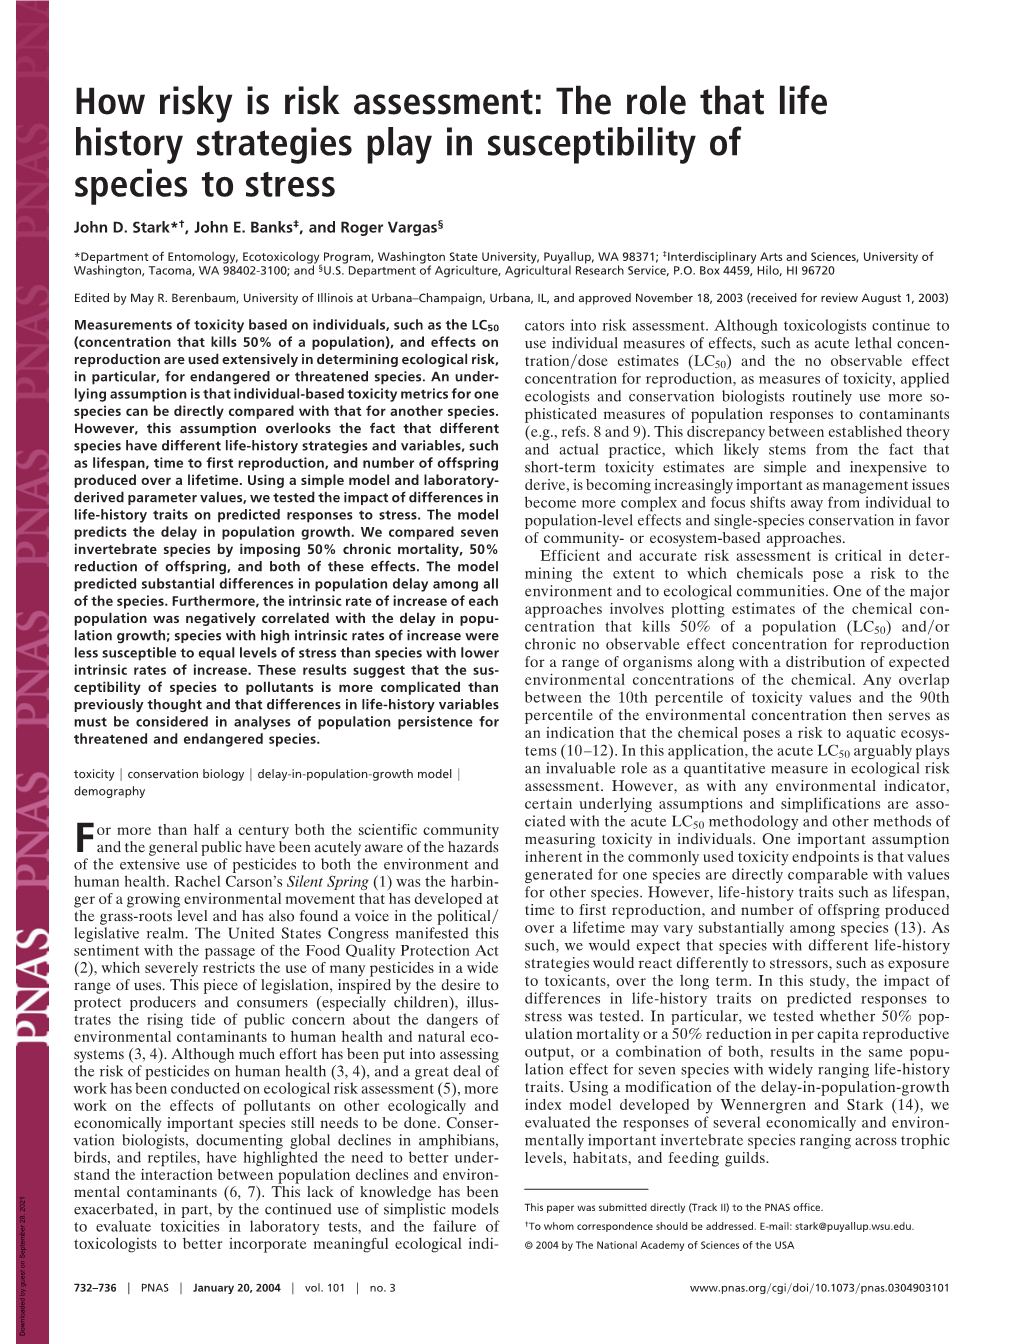 The Role That Life History Strategies Play in Susceptibility of Species to Stress